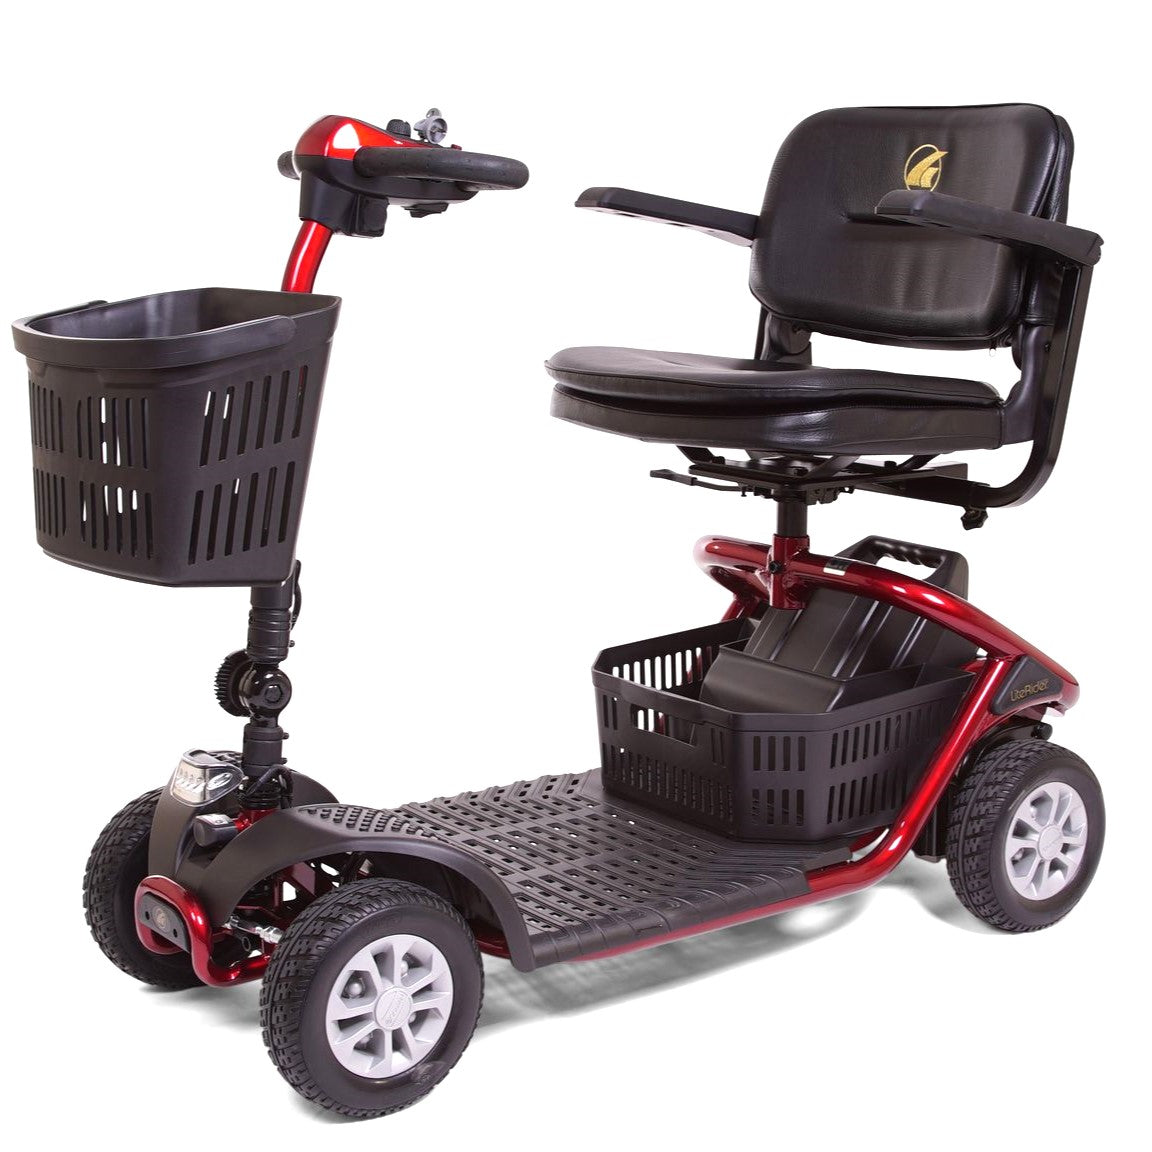 LiteRider 4-Wheel Mobility Scooter - GL141